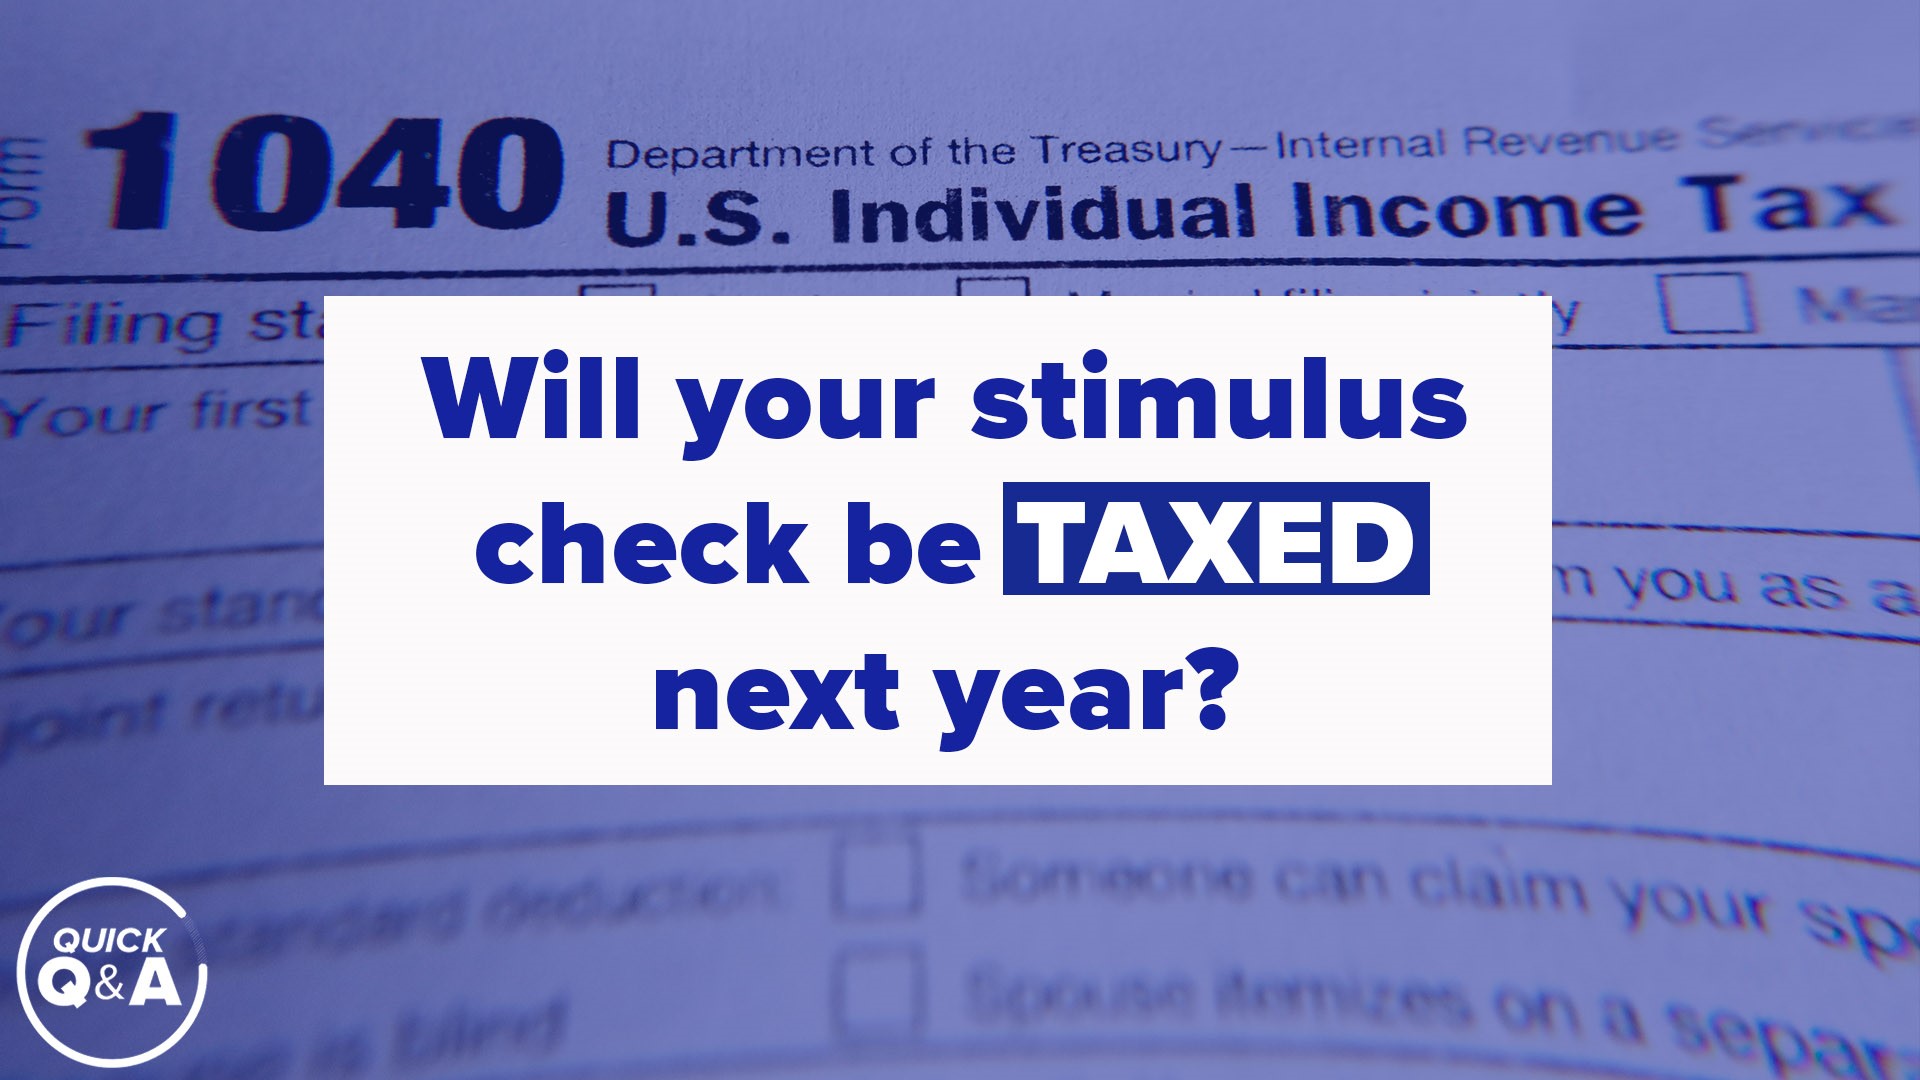 Got questions about the stimulus check? We've got some answers in this Quick Questions